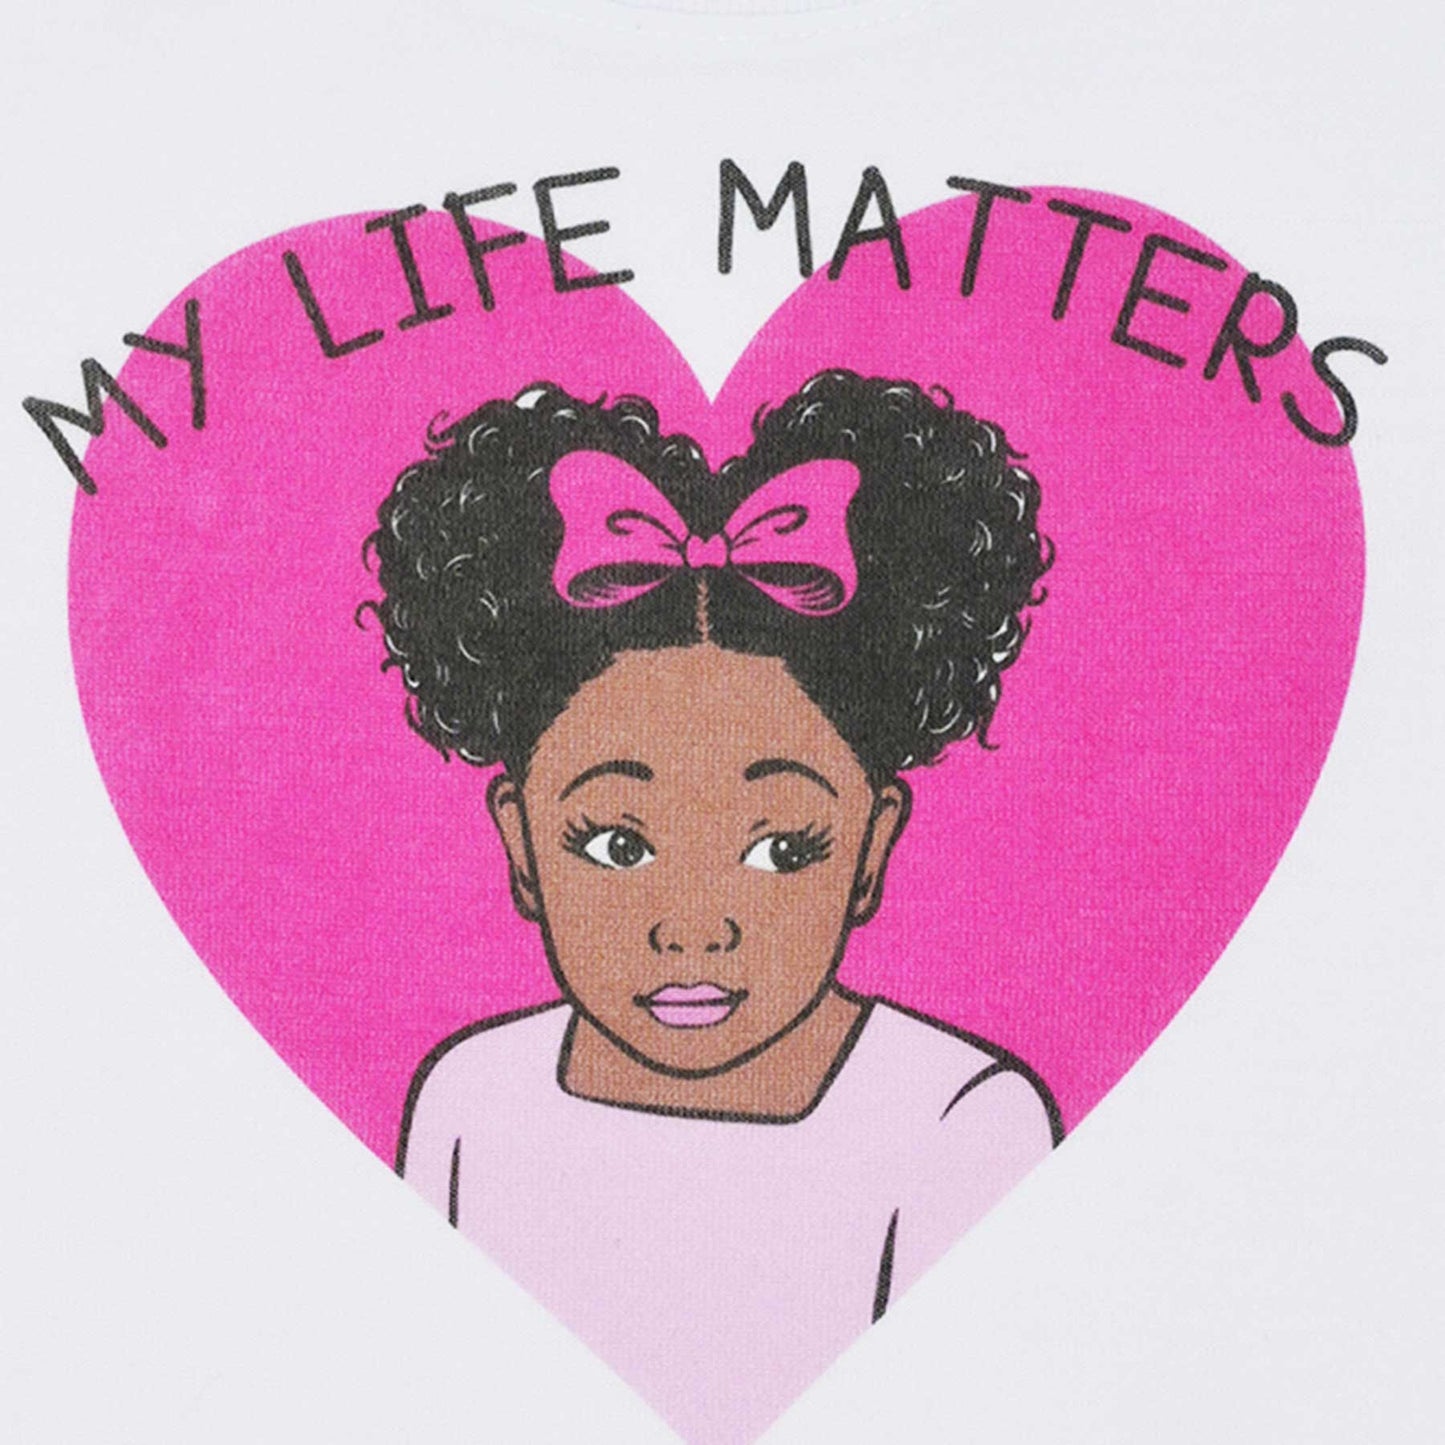 Beautiful Me | Baby Onesie | 12 Month | My Life Matters | Big Pink Heart